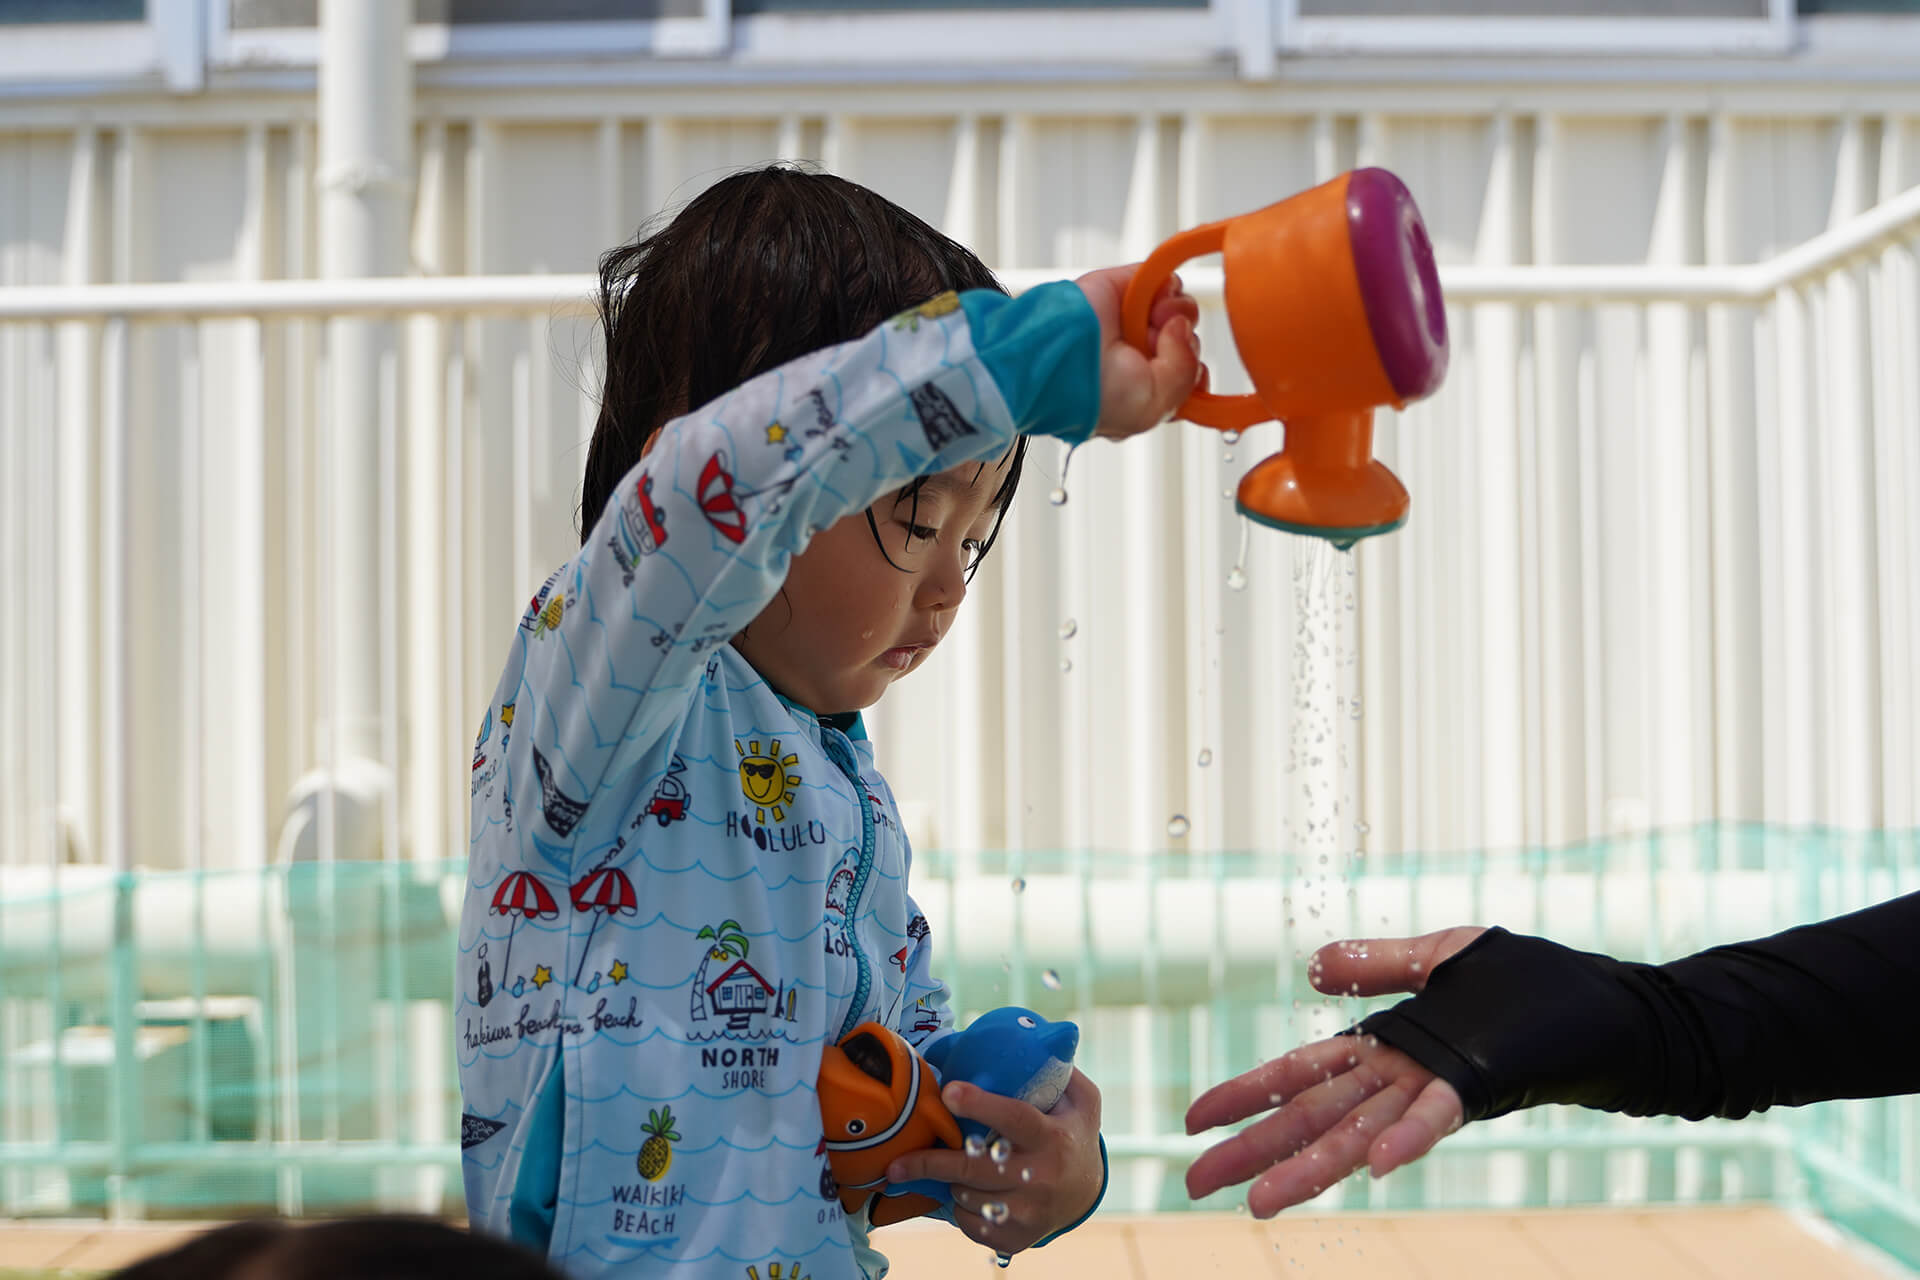 Pouring water on the teacher!